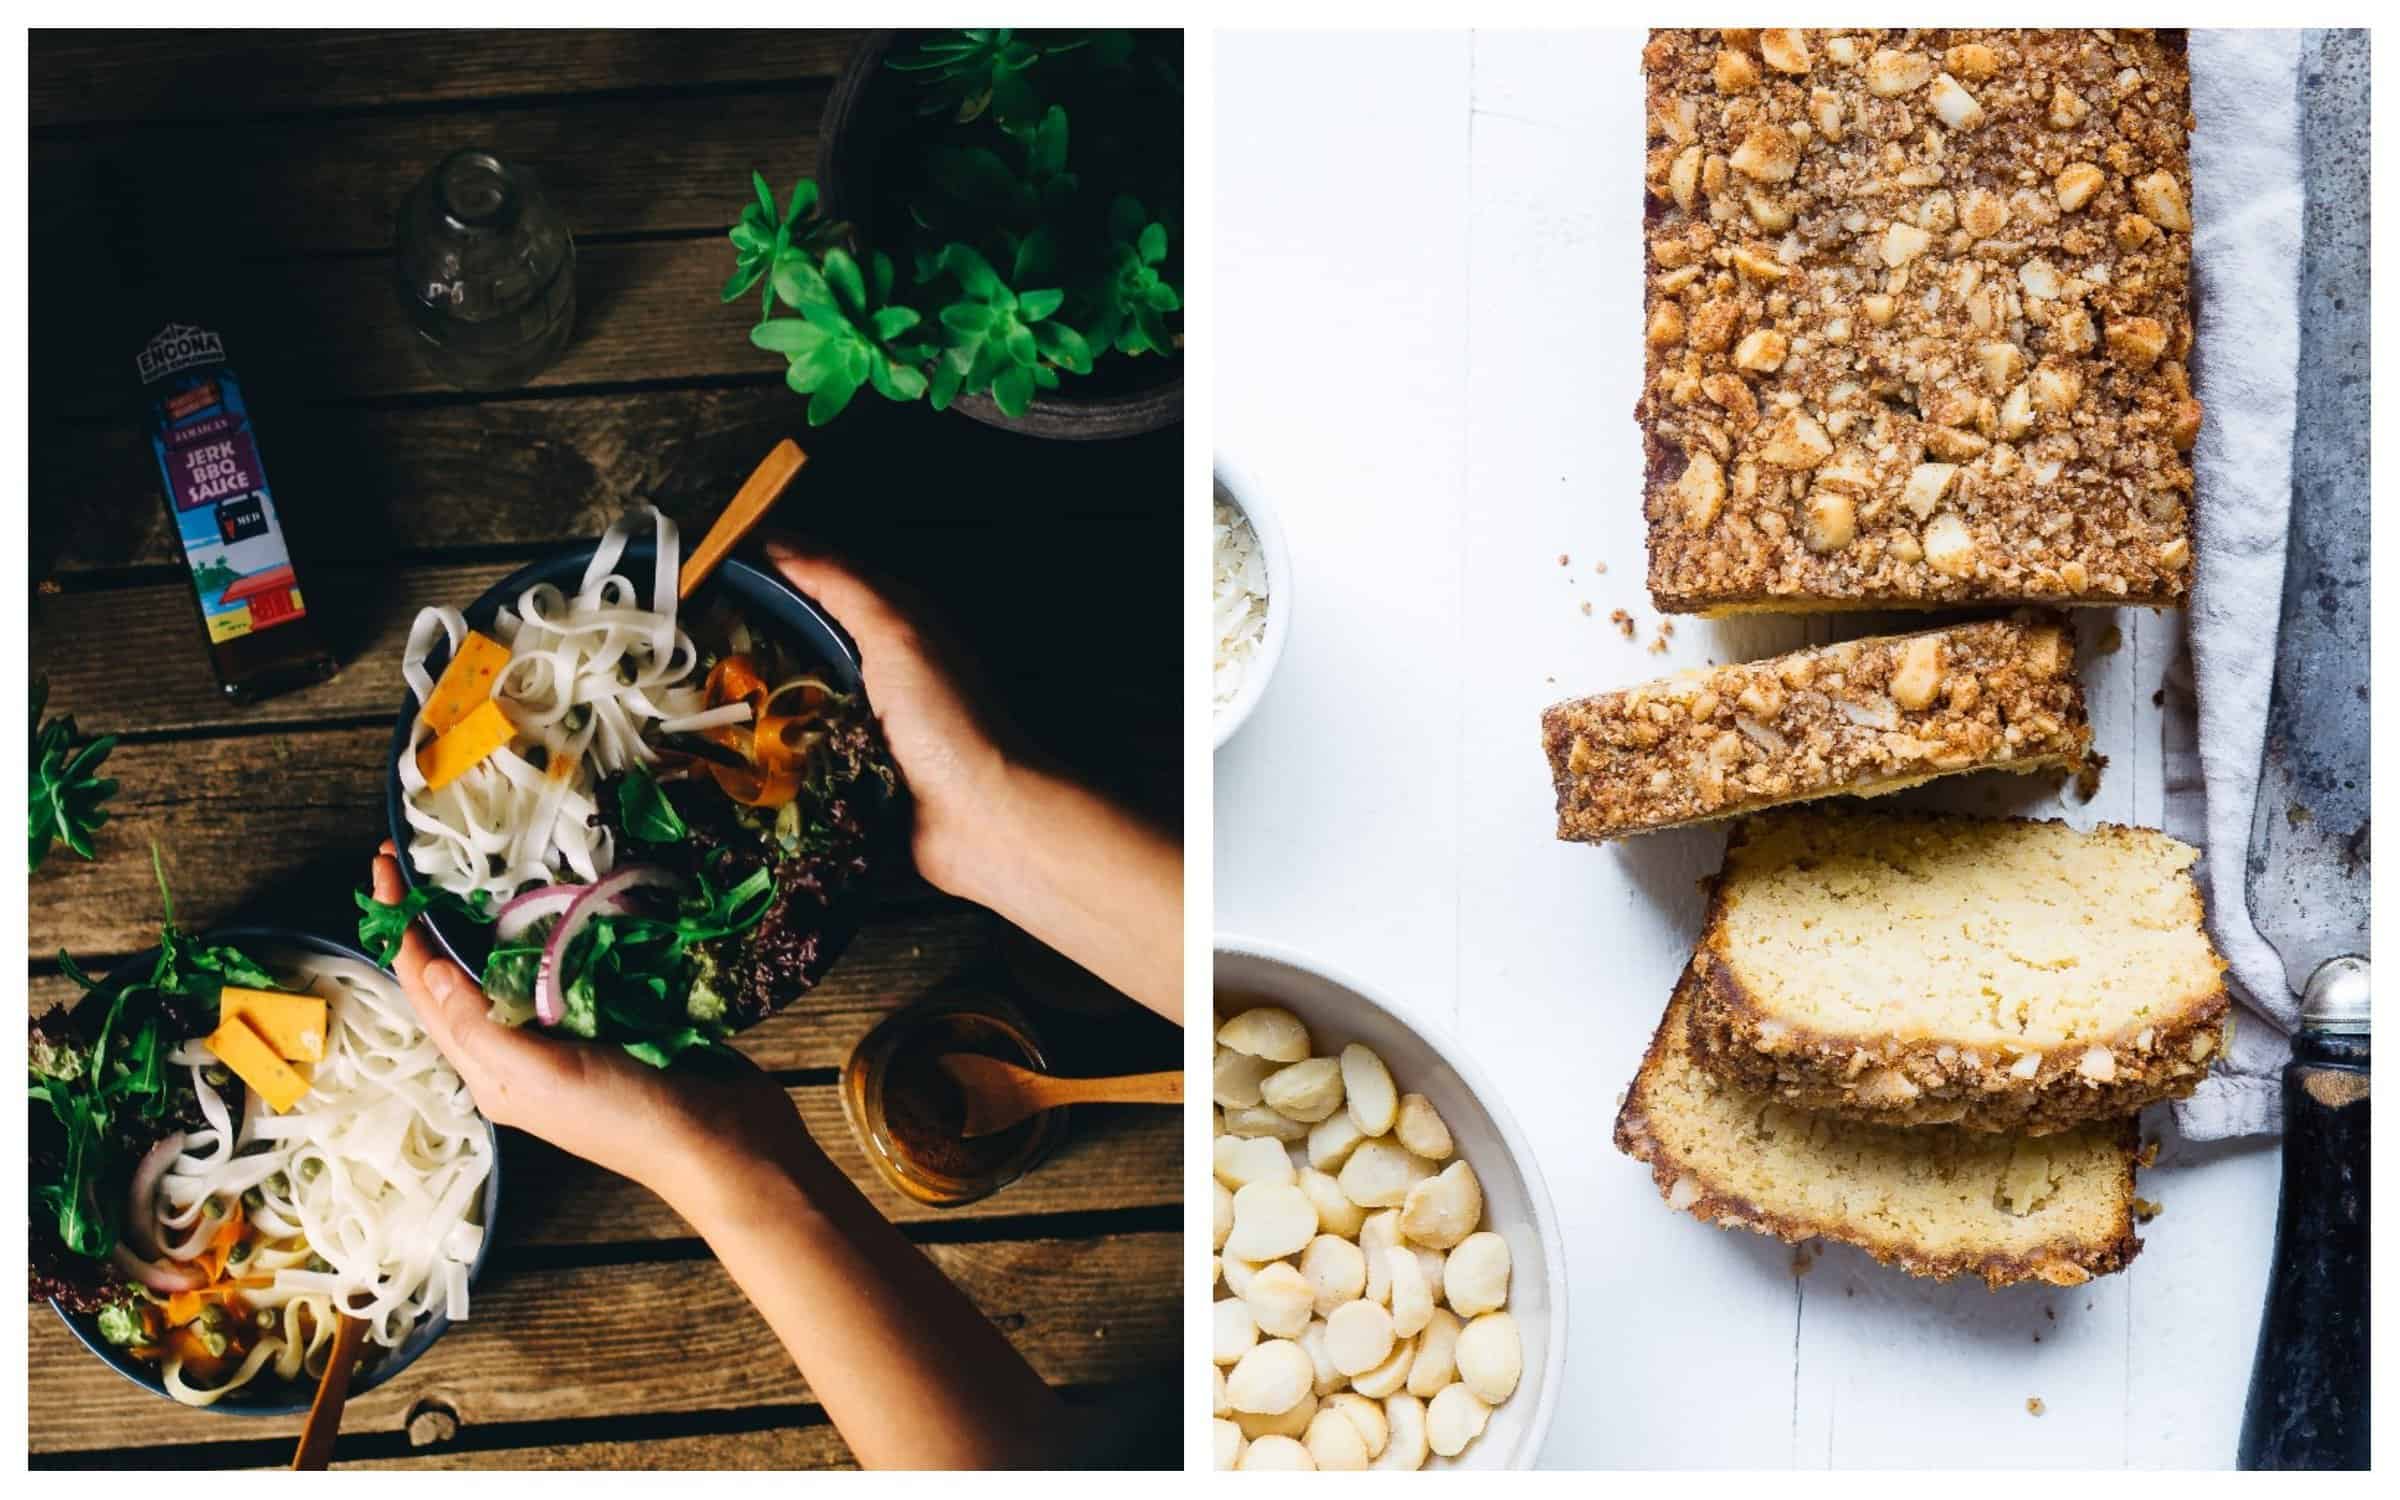 HiP Paris' guide to gluten-free restaurants and bakeries in Paris, which has some amazing options from veggie noodle bowls (left) to homemade artisanal seeded breads (right).